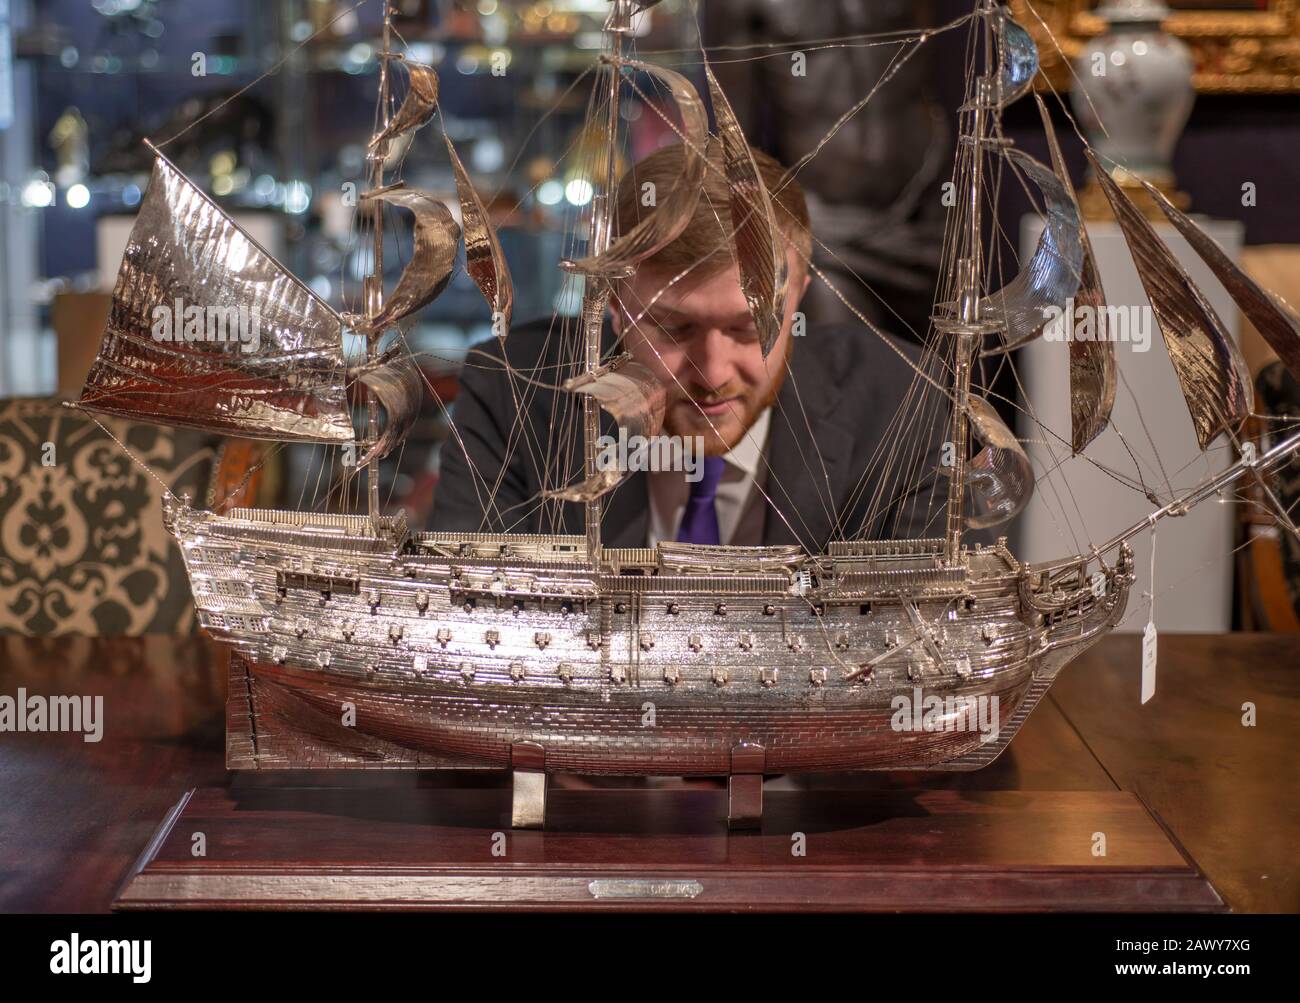 Bonhams Knightsbridge London Uk 10th February Gentlemans Library Sale Preview The Sale Runs From 12 13 February Image Large Silver Model Of Hms Victory Italian th Century Estimate 10 000 15 000 Credit Malcolm